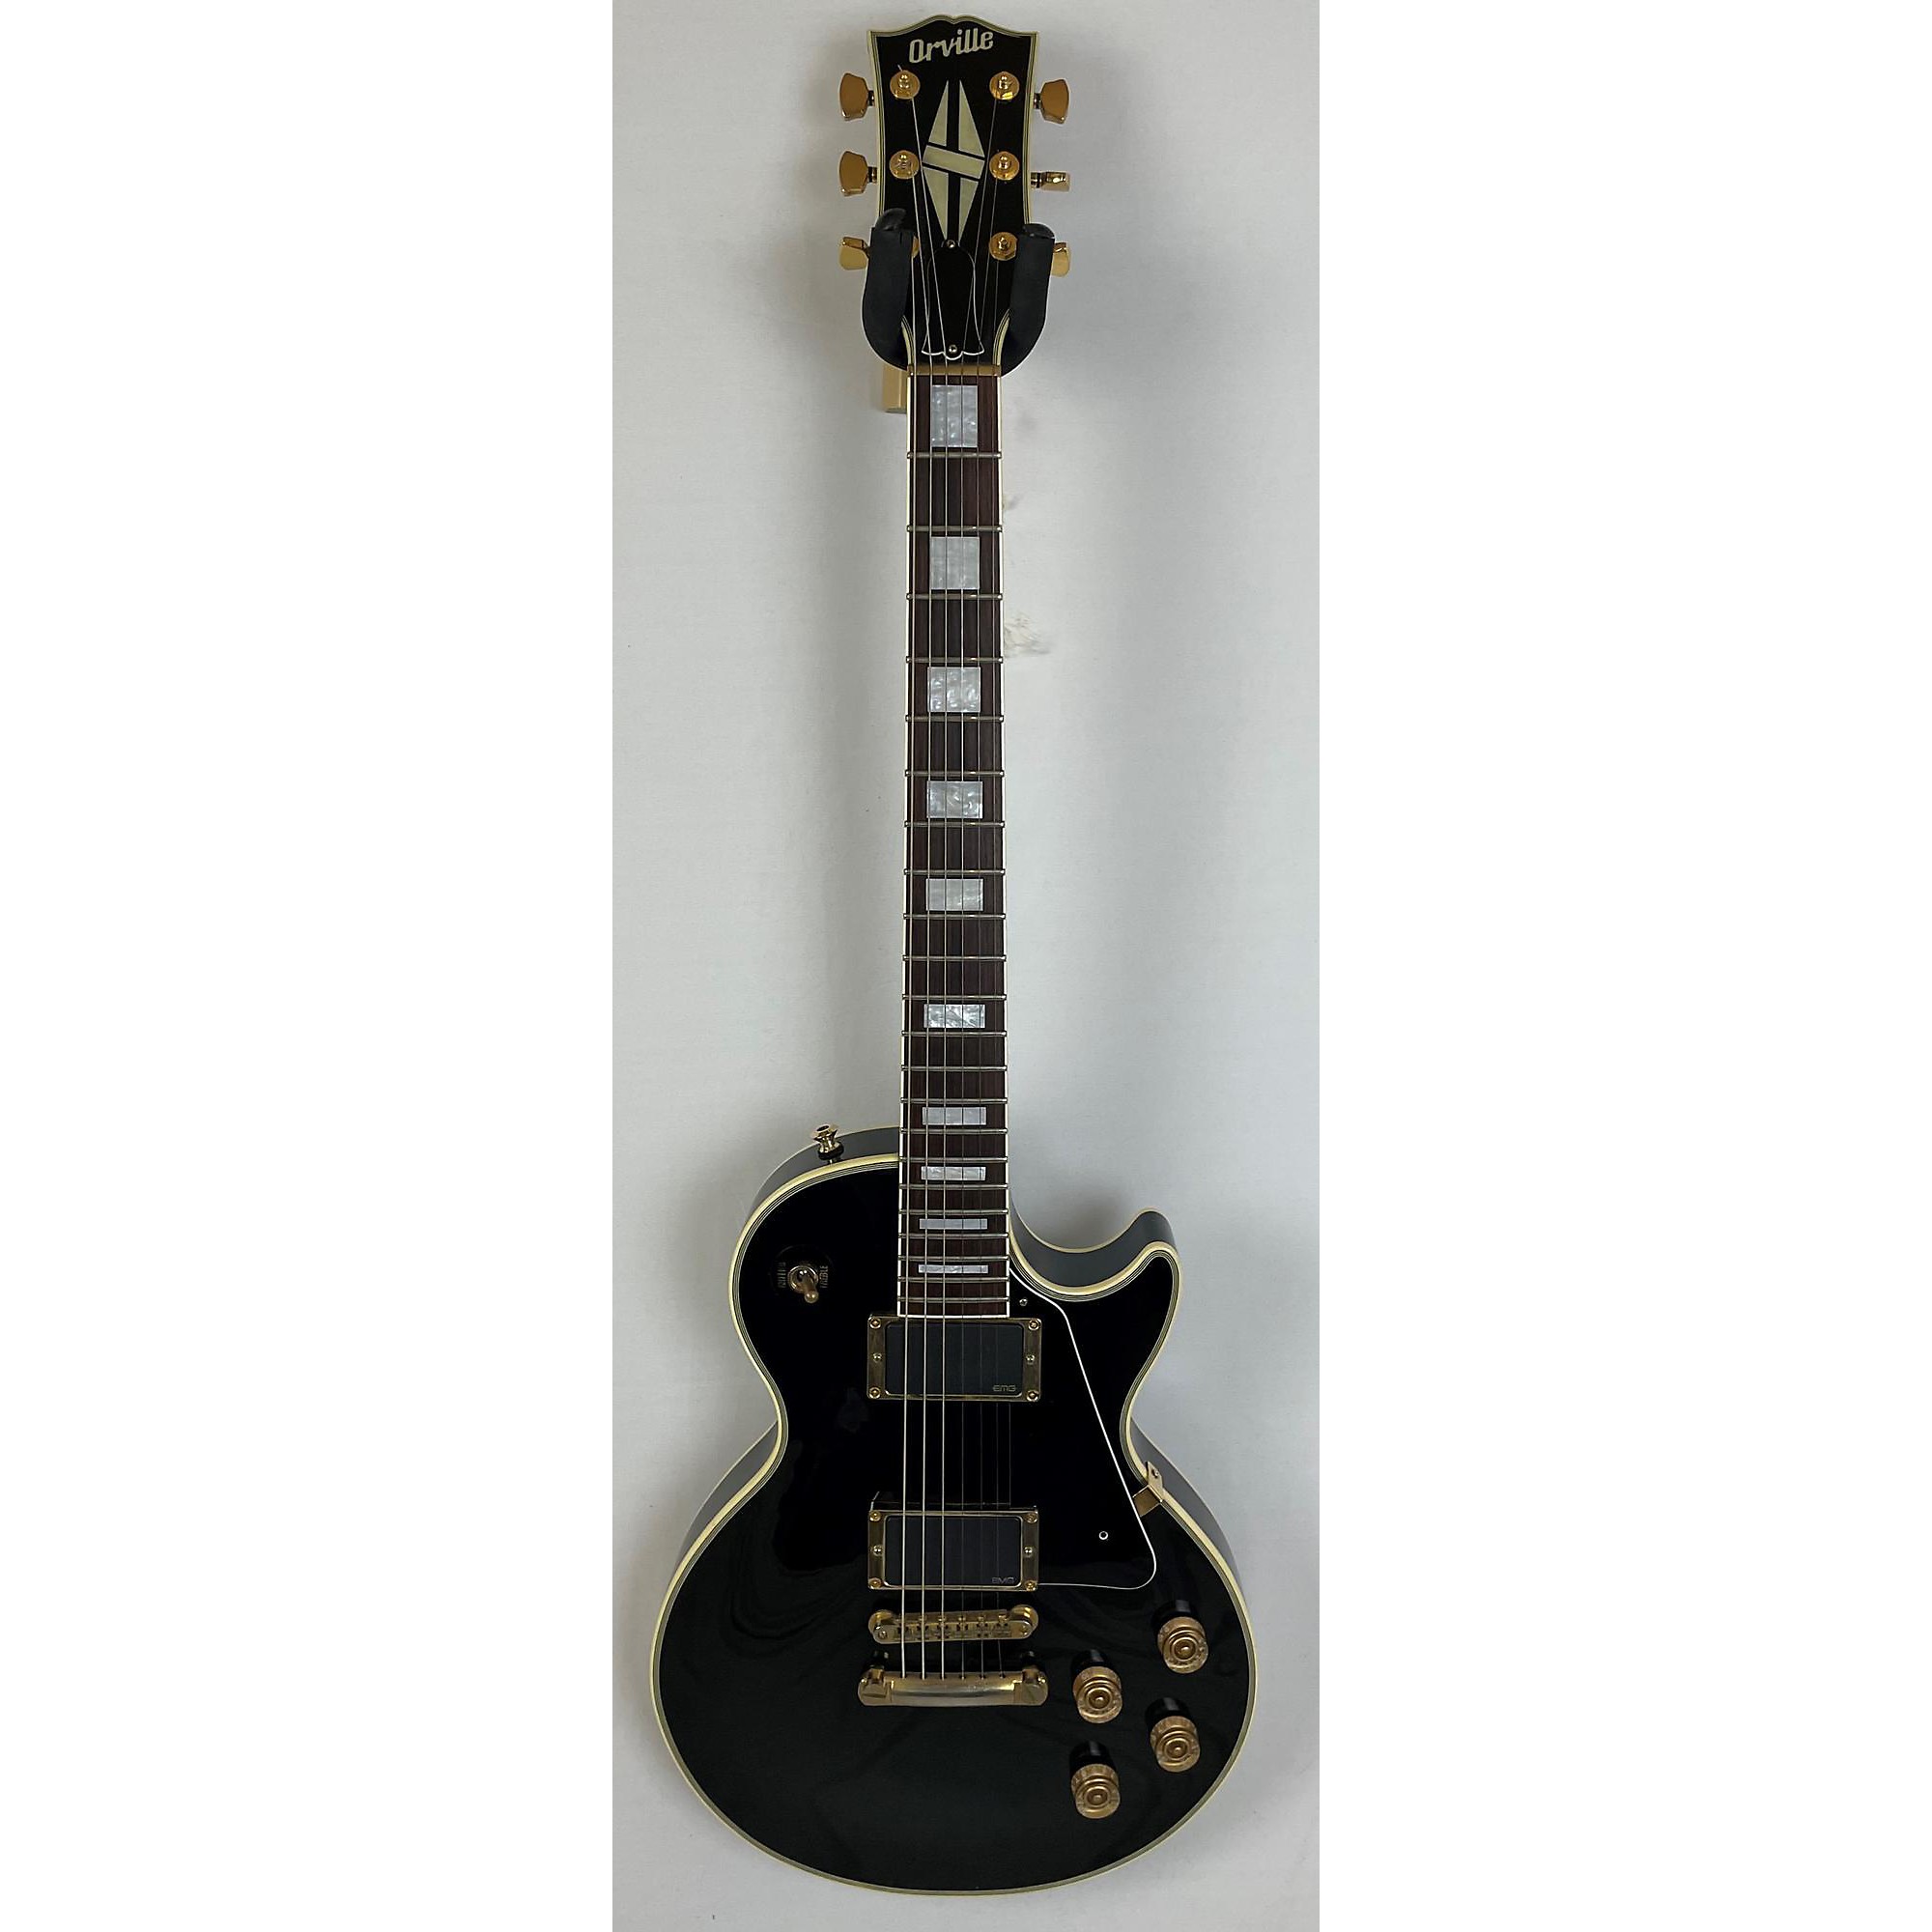 Used Used ORVILLE LES PAUL CUSTOM Black Solid Body Electric 